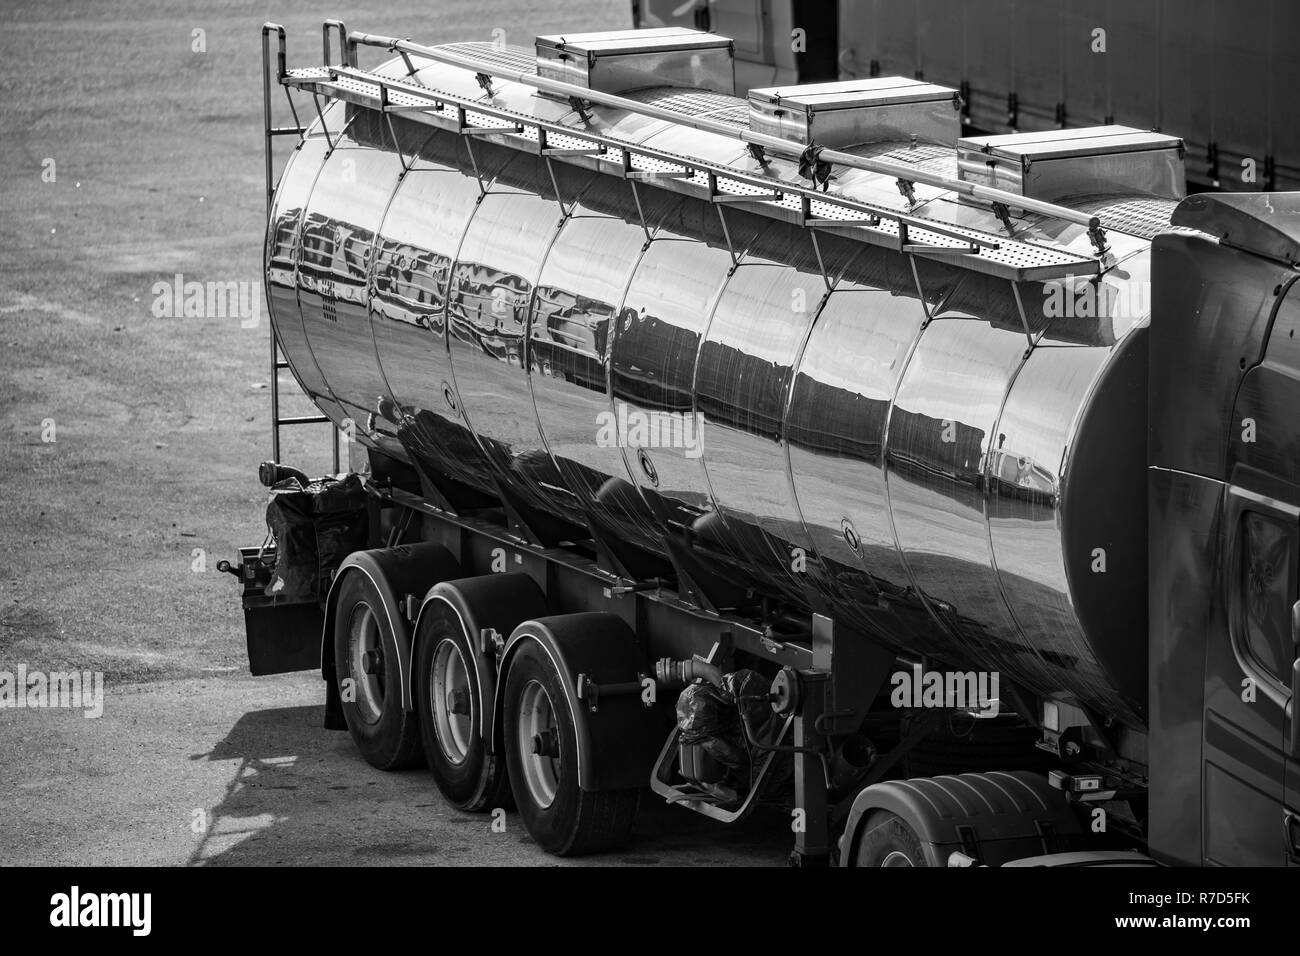 The rear-side part of shiny tin fuel truck, black and white side high-angle view reflecting containers in an open area Stock Photo